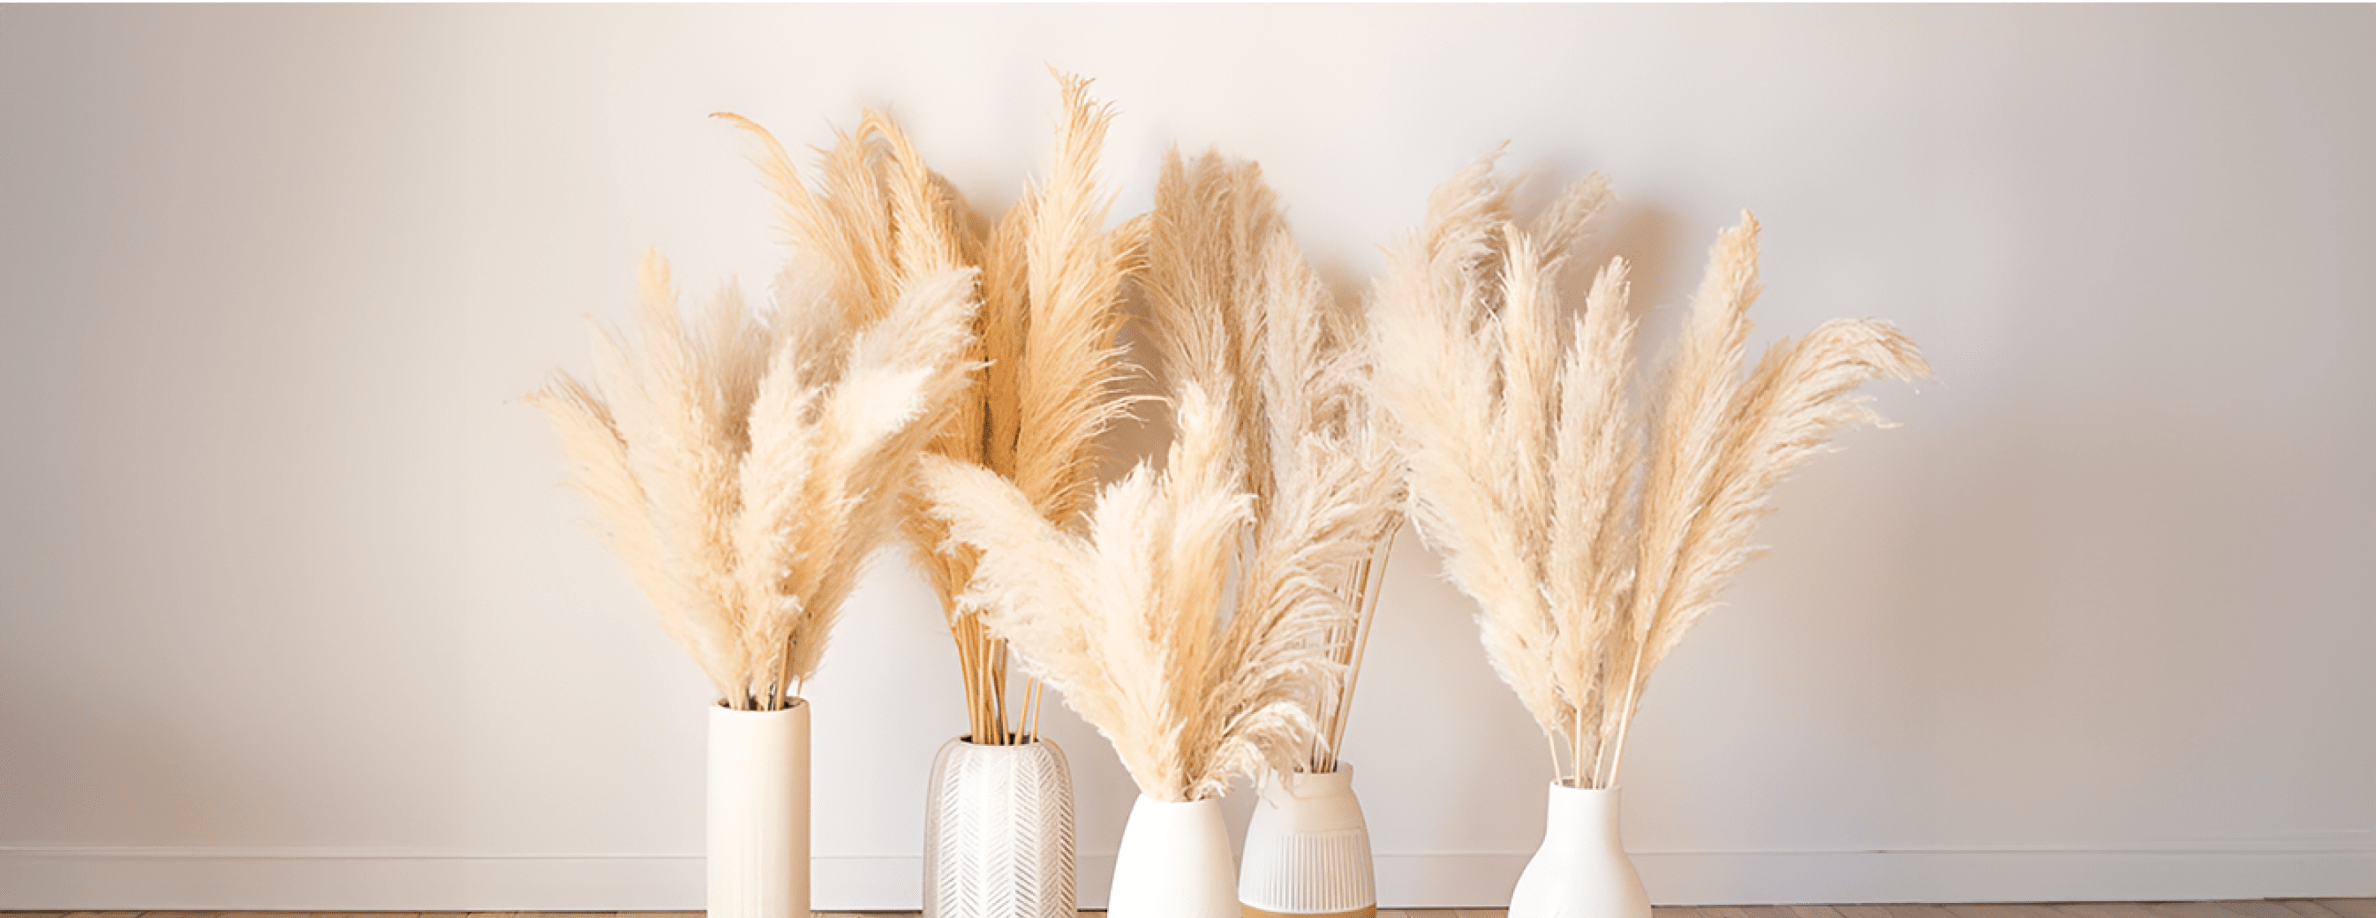 How_to_care_for_pampas_grass